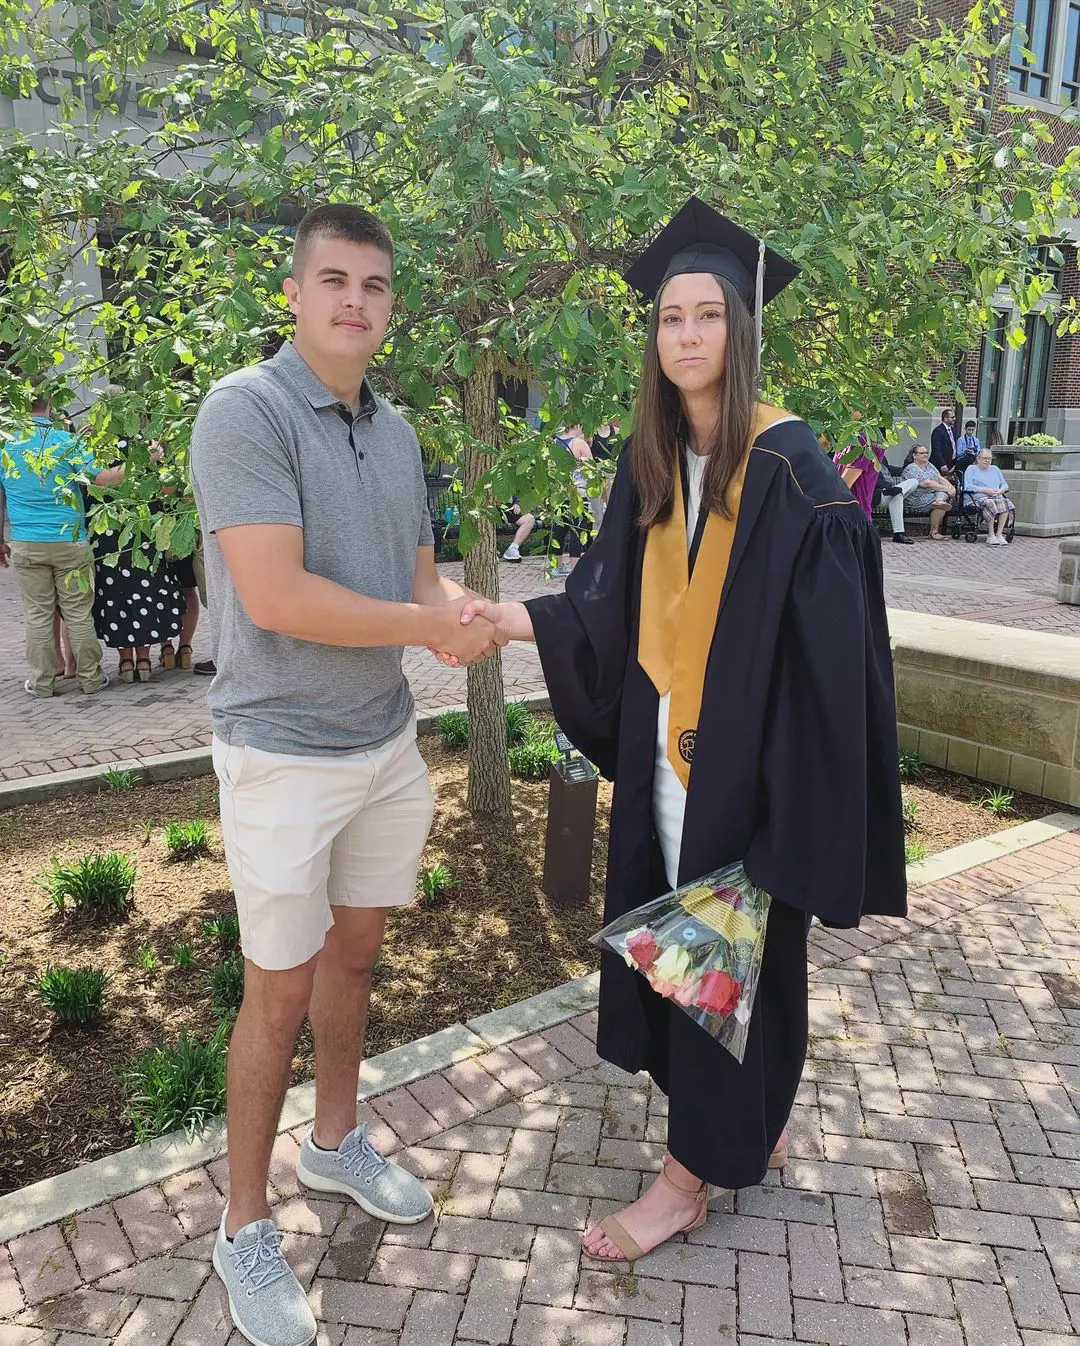 Jael celebrated her graduation ceremony at West Lafayette, Indiana with her husband Aidan O'Connell.